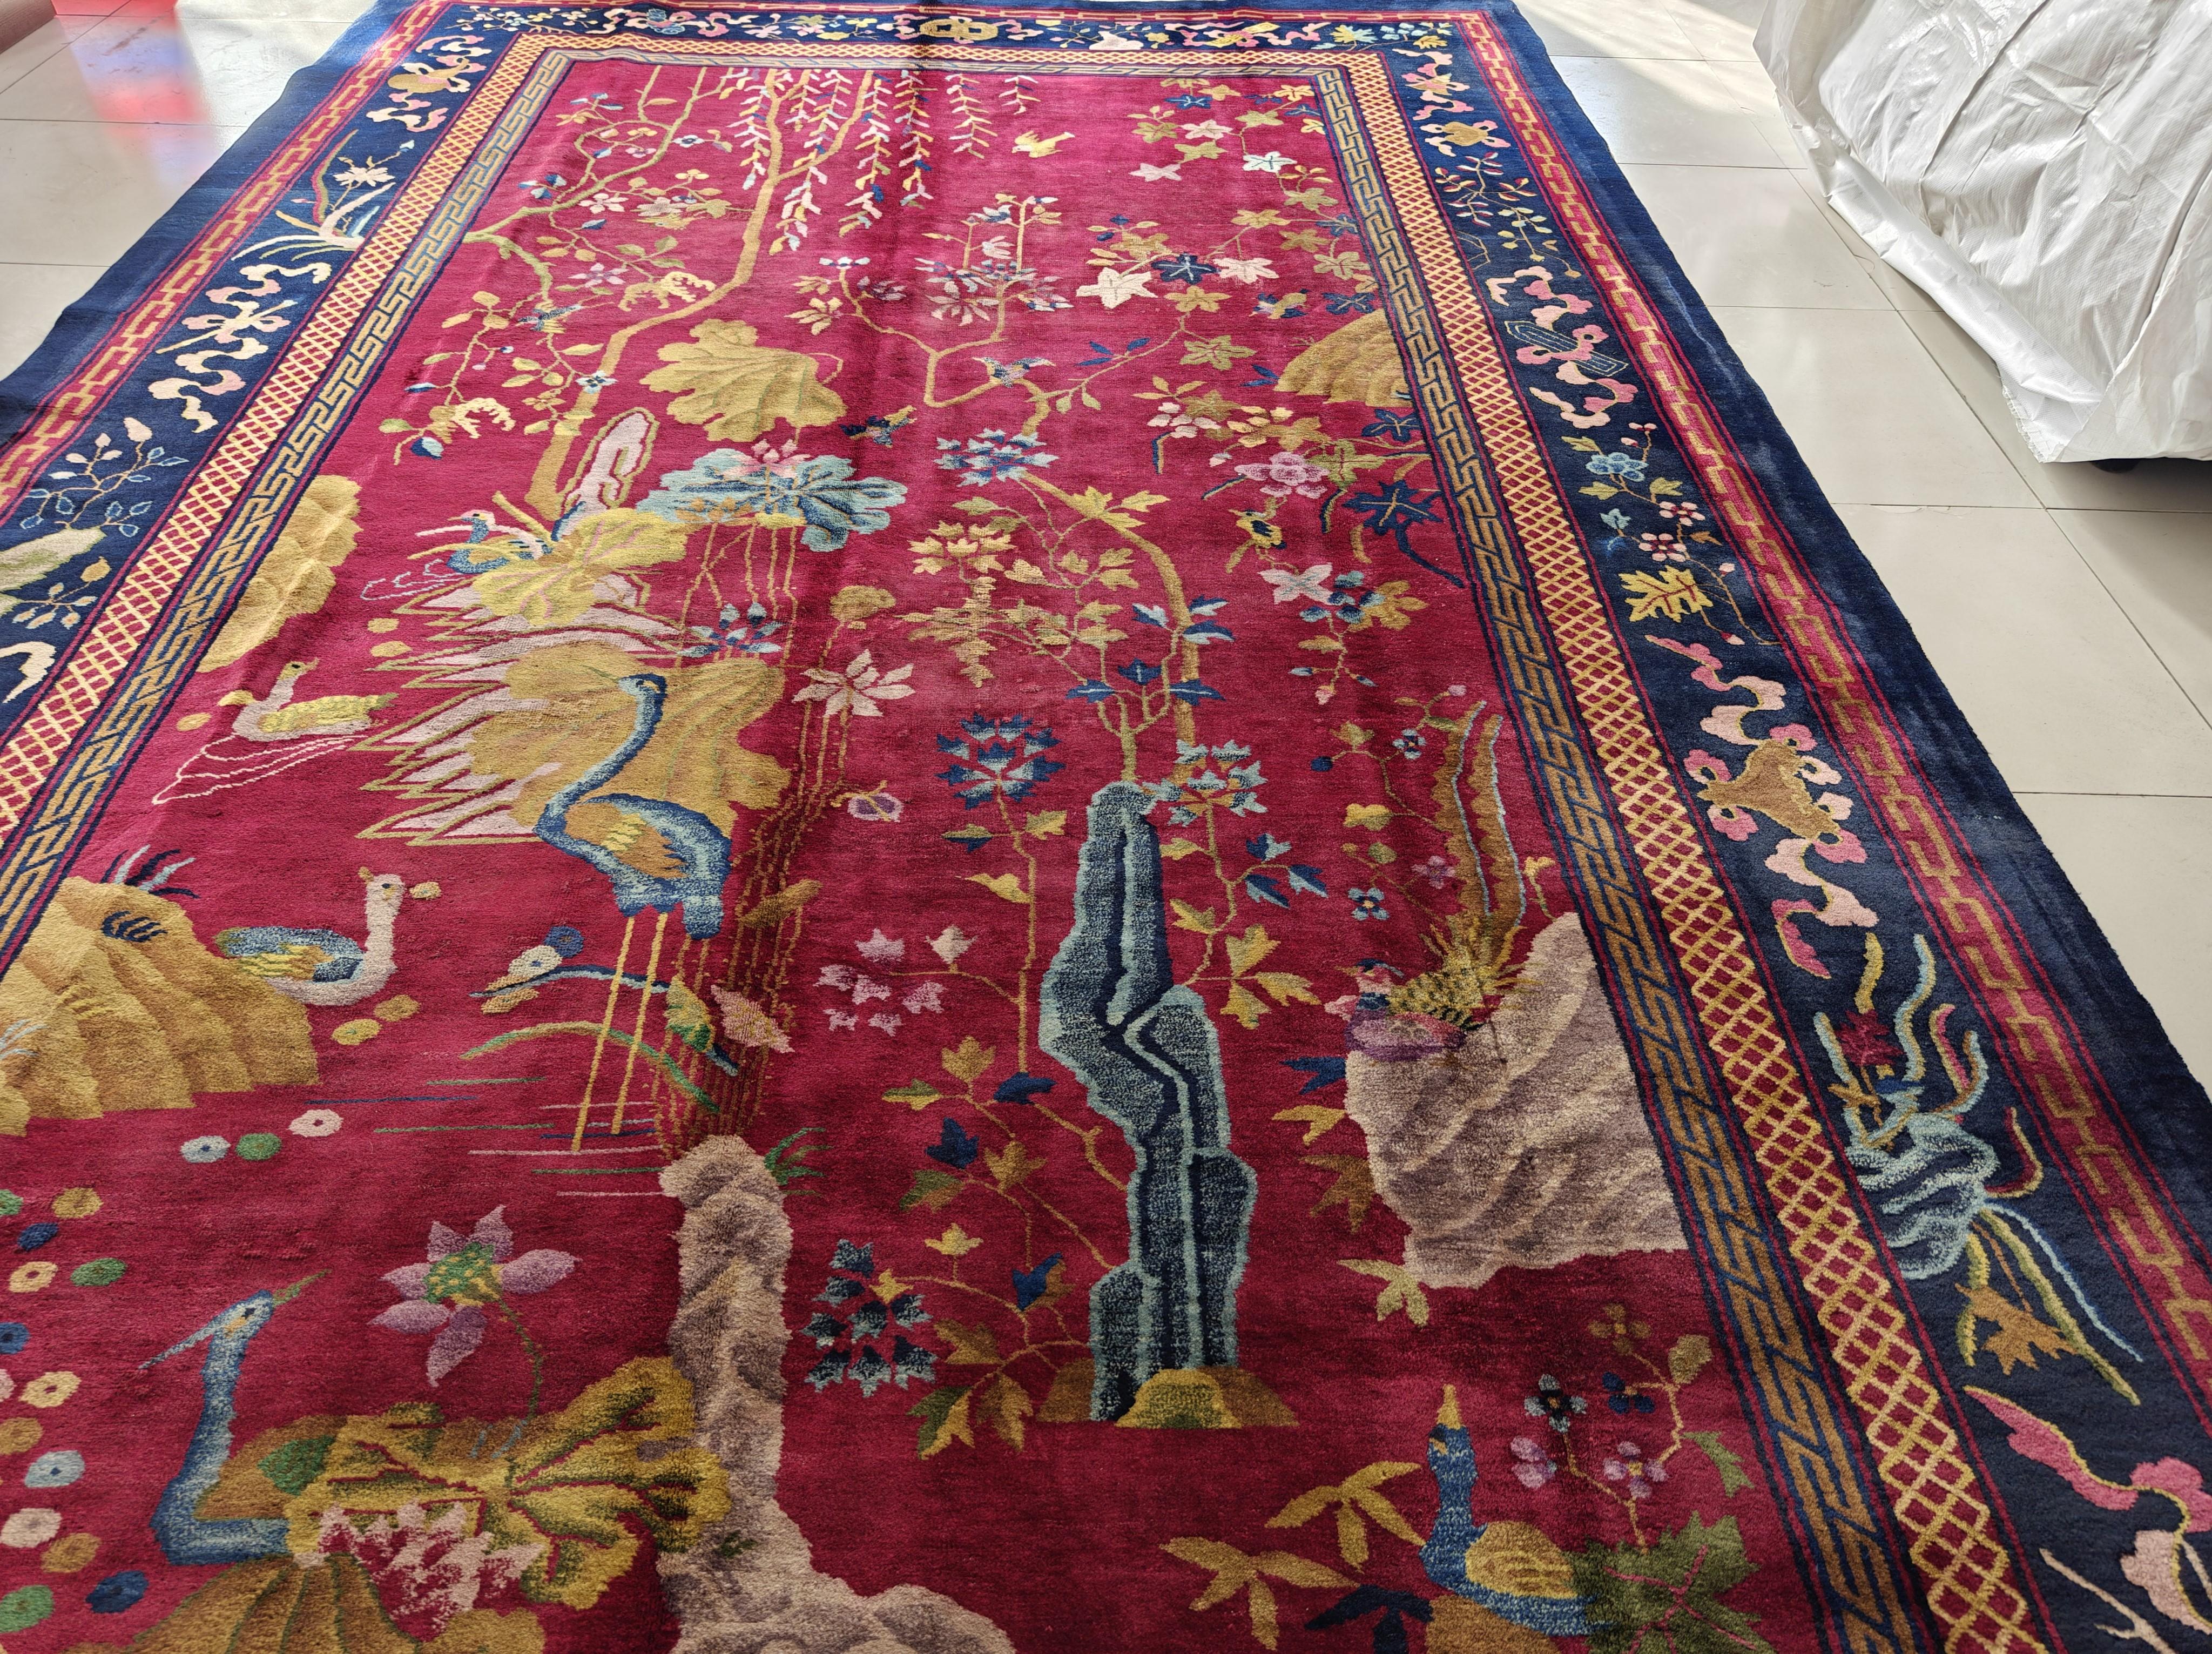 1920s Chinese Art Deco Carpet ( 9' x 14' - 274 x 427 ) For Sale 2